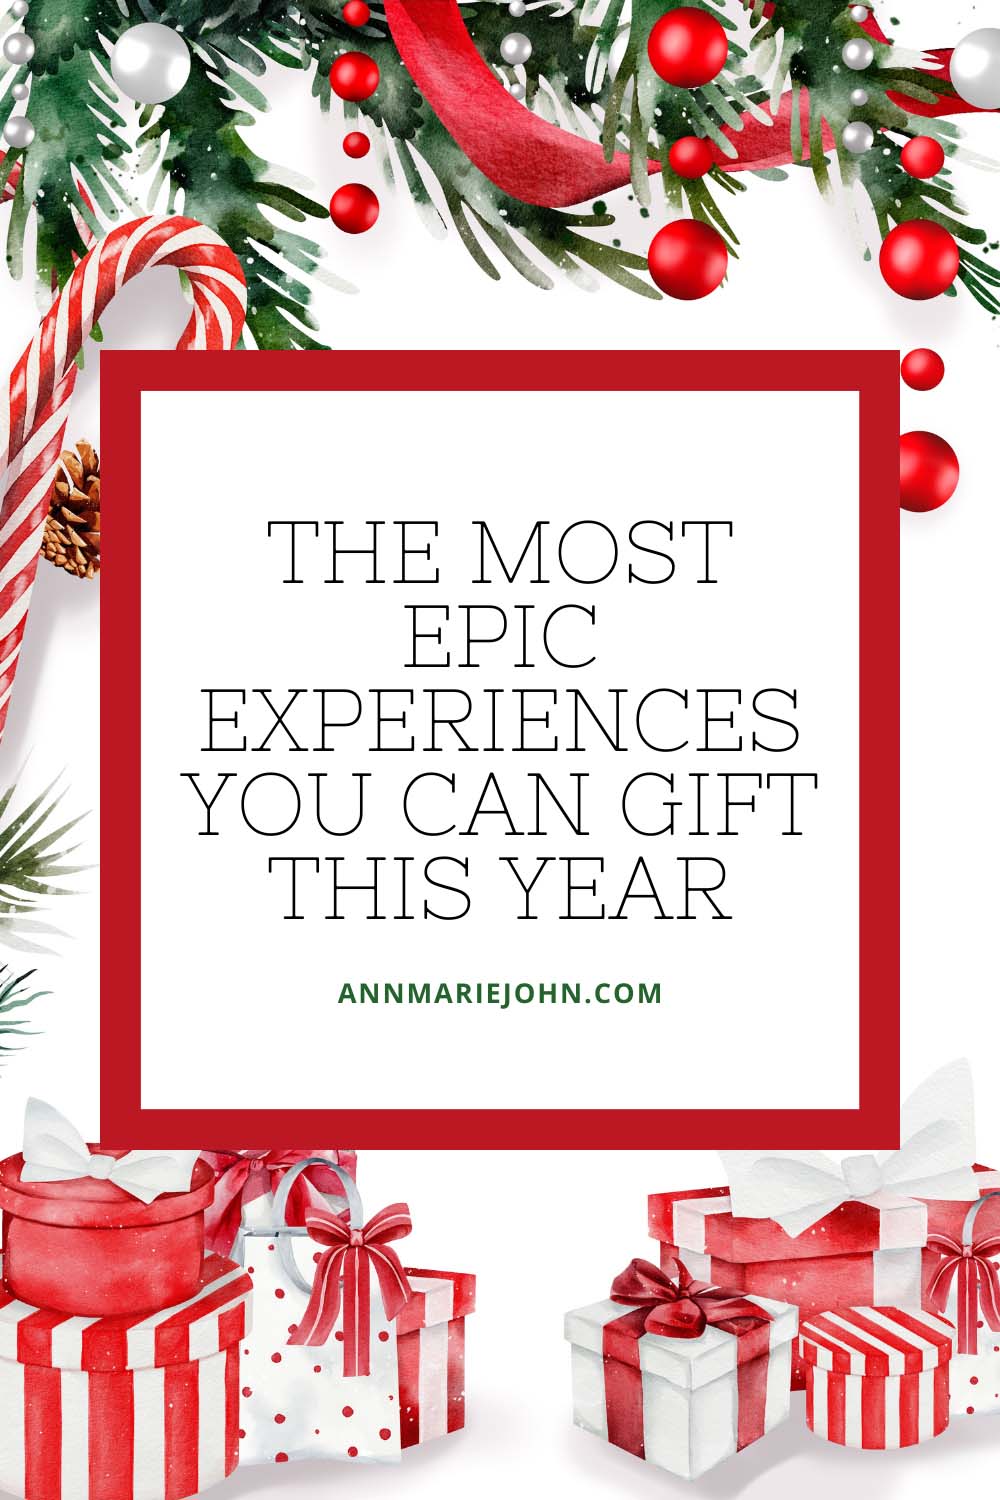 The Most Epic Experiences You Can Gift This Year